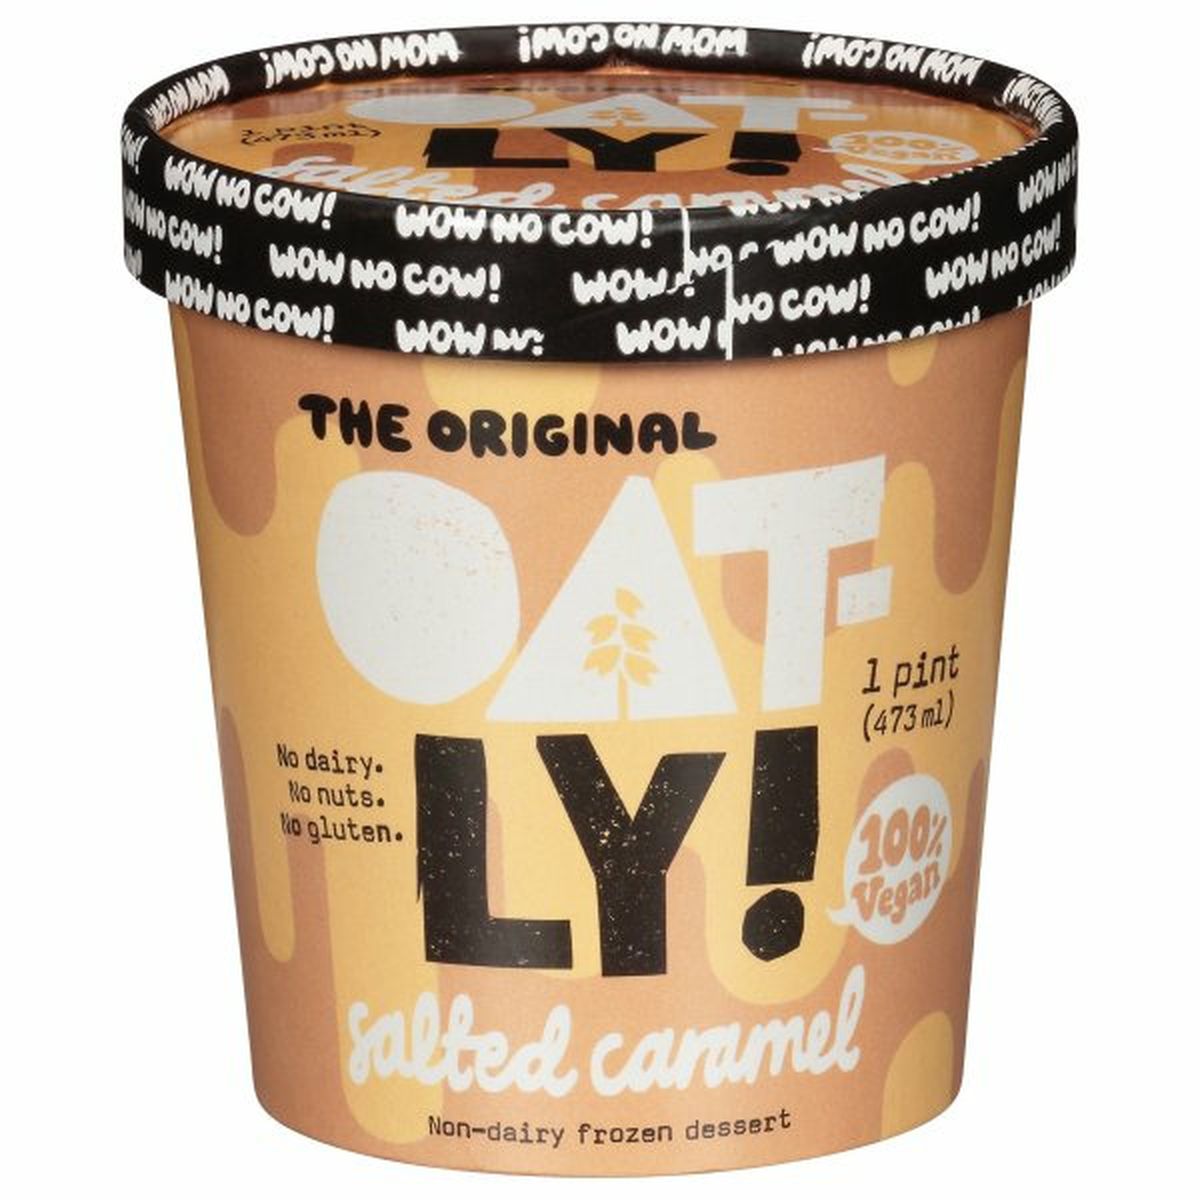 Calories in Oat-LY! Frozen Dessert, Non-Dairy, Salted Caramel